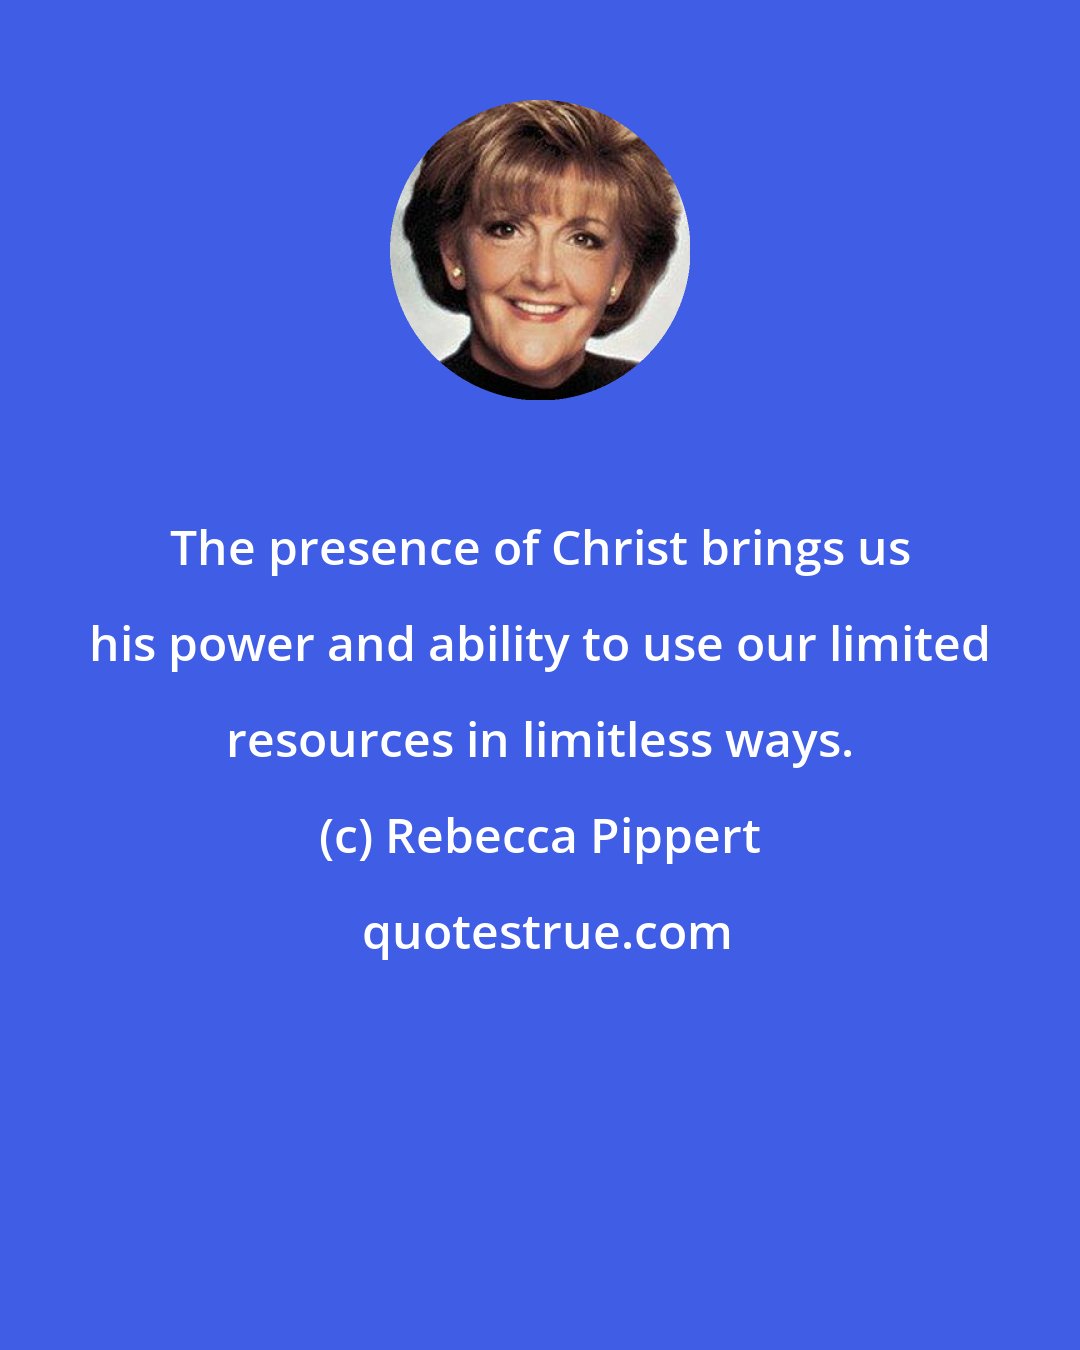 Rebecca Pippert: The presence of Christ brings us his power and ability to use our limited resources in limitless ways.